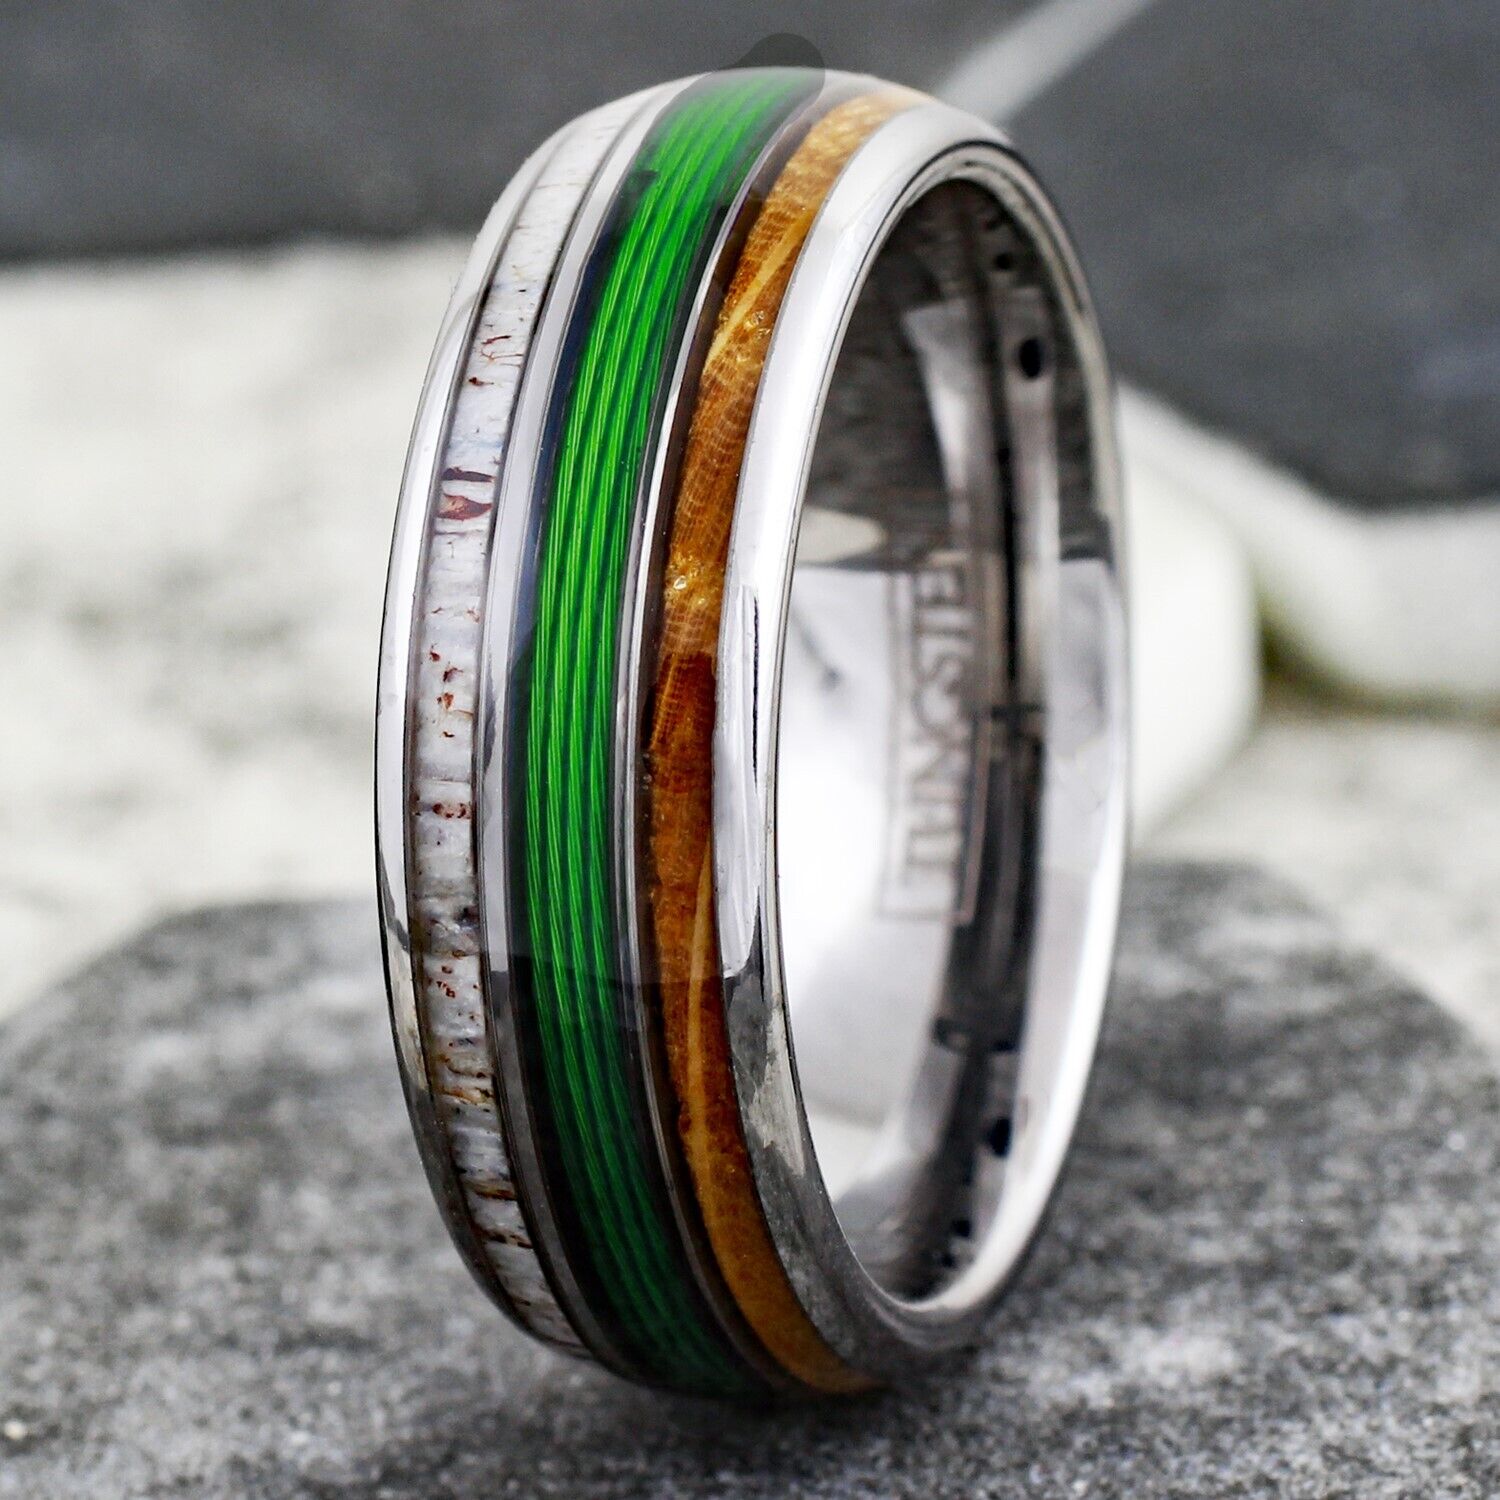 Beautiful Magnificent Polished Silver Tungsten Low Dome Ring with Green Real Fishing Line Between Whiskey Barrel Oak Wood and Deer Antler Inlays.